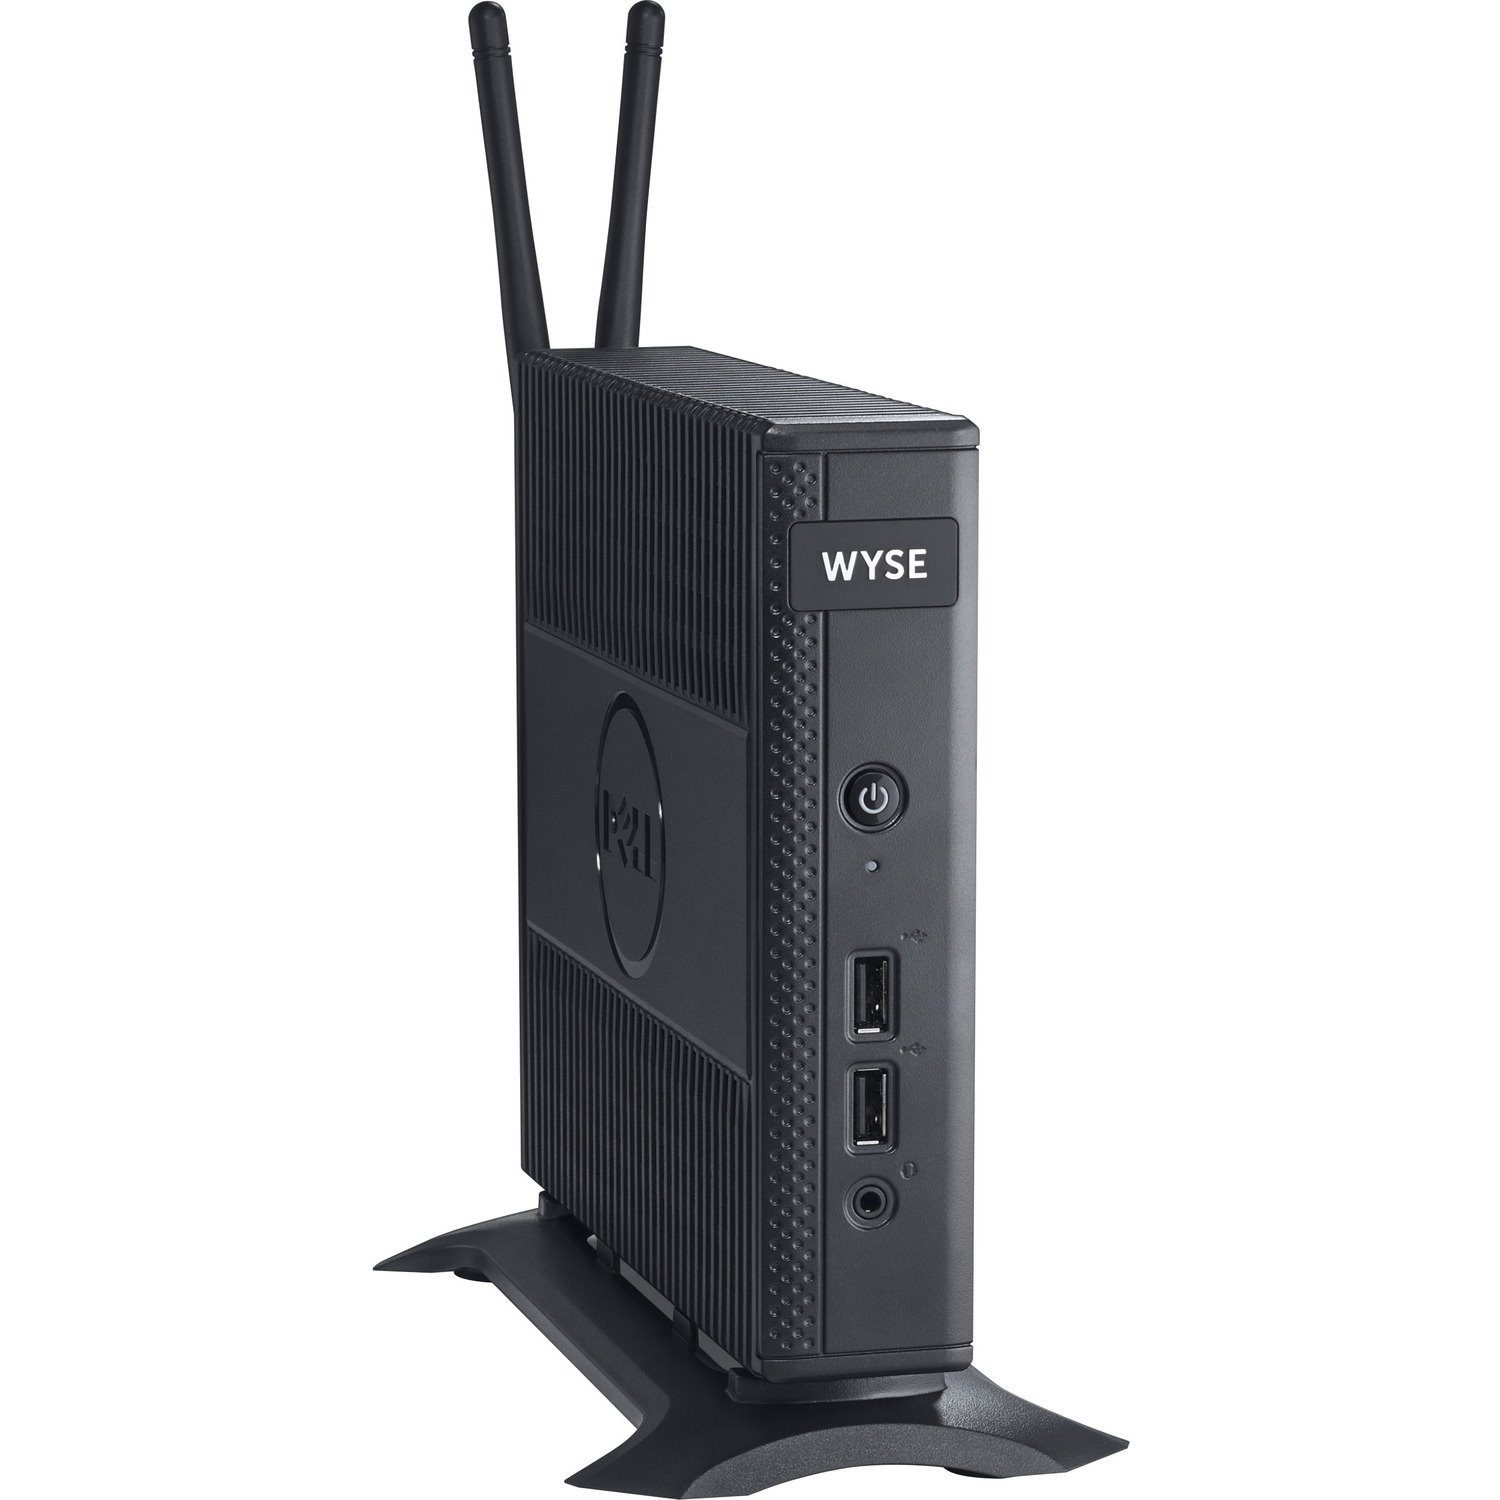 Wyse 5000 5010 Thin Client - AMD G-Series T48E Dual-core (2 Core) 1.40 GHz